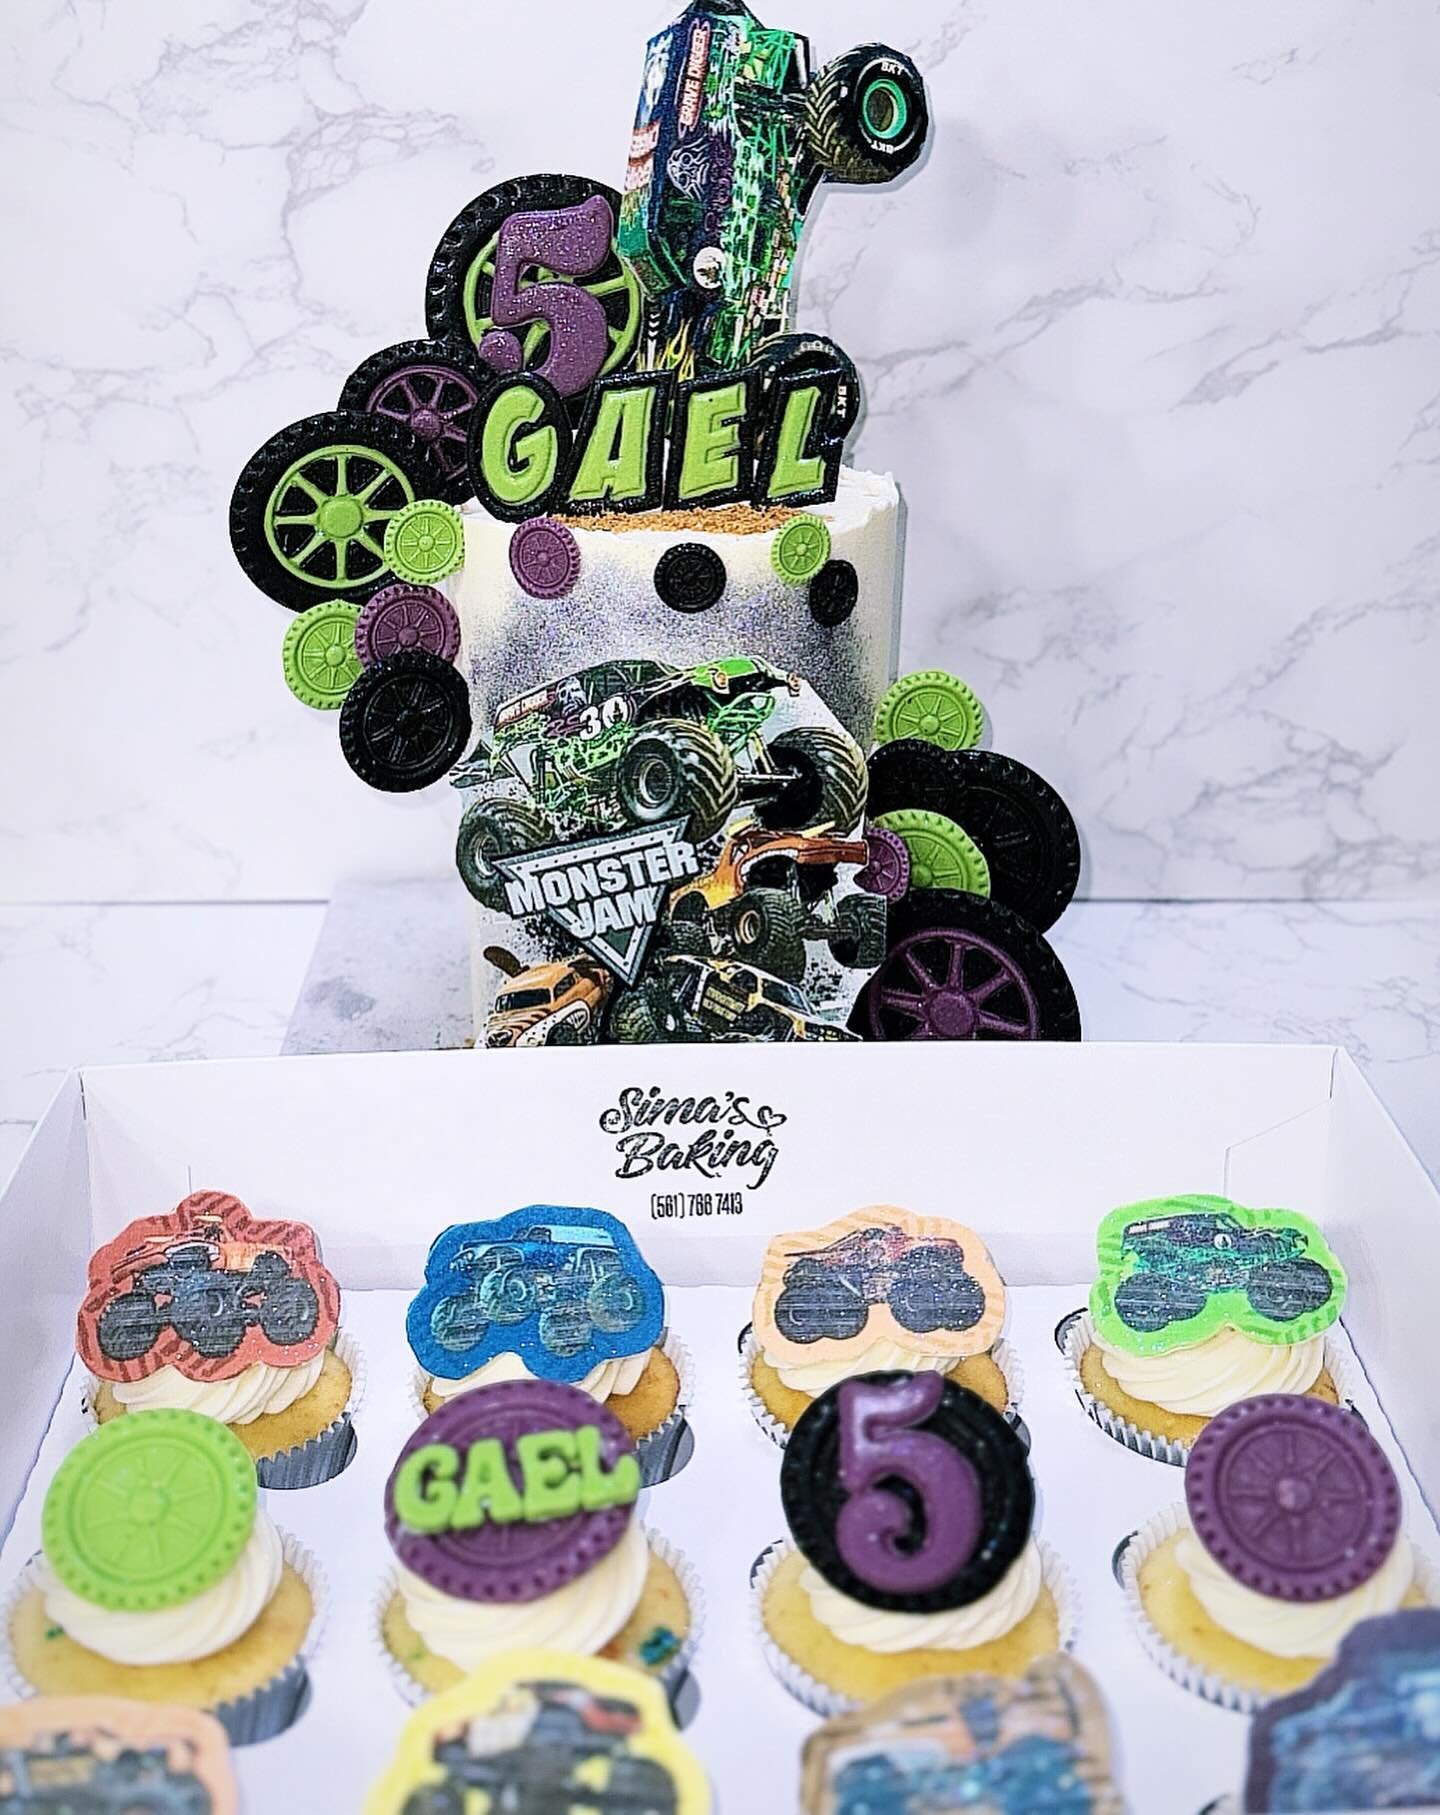 Monster Jam💚🖤💜

To order yours use the link in my bio. 

-

#monsterjamparty #monsterjamcake #boysbirthdaycake #birthdaycake #birthdaycakeideas  #cupcakebirthday #birthdayboys #boysbirthday #customcupcakes #boca #bocaratonflorida #simasbaking